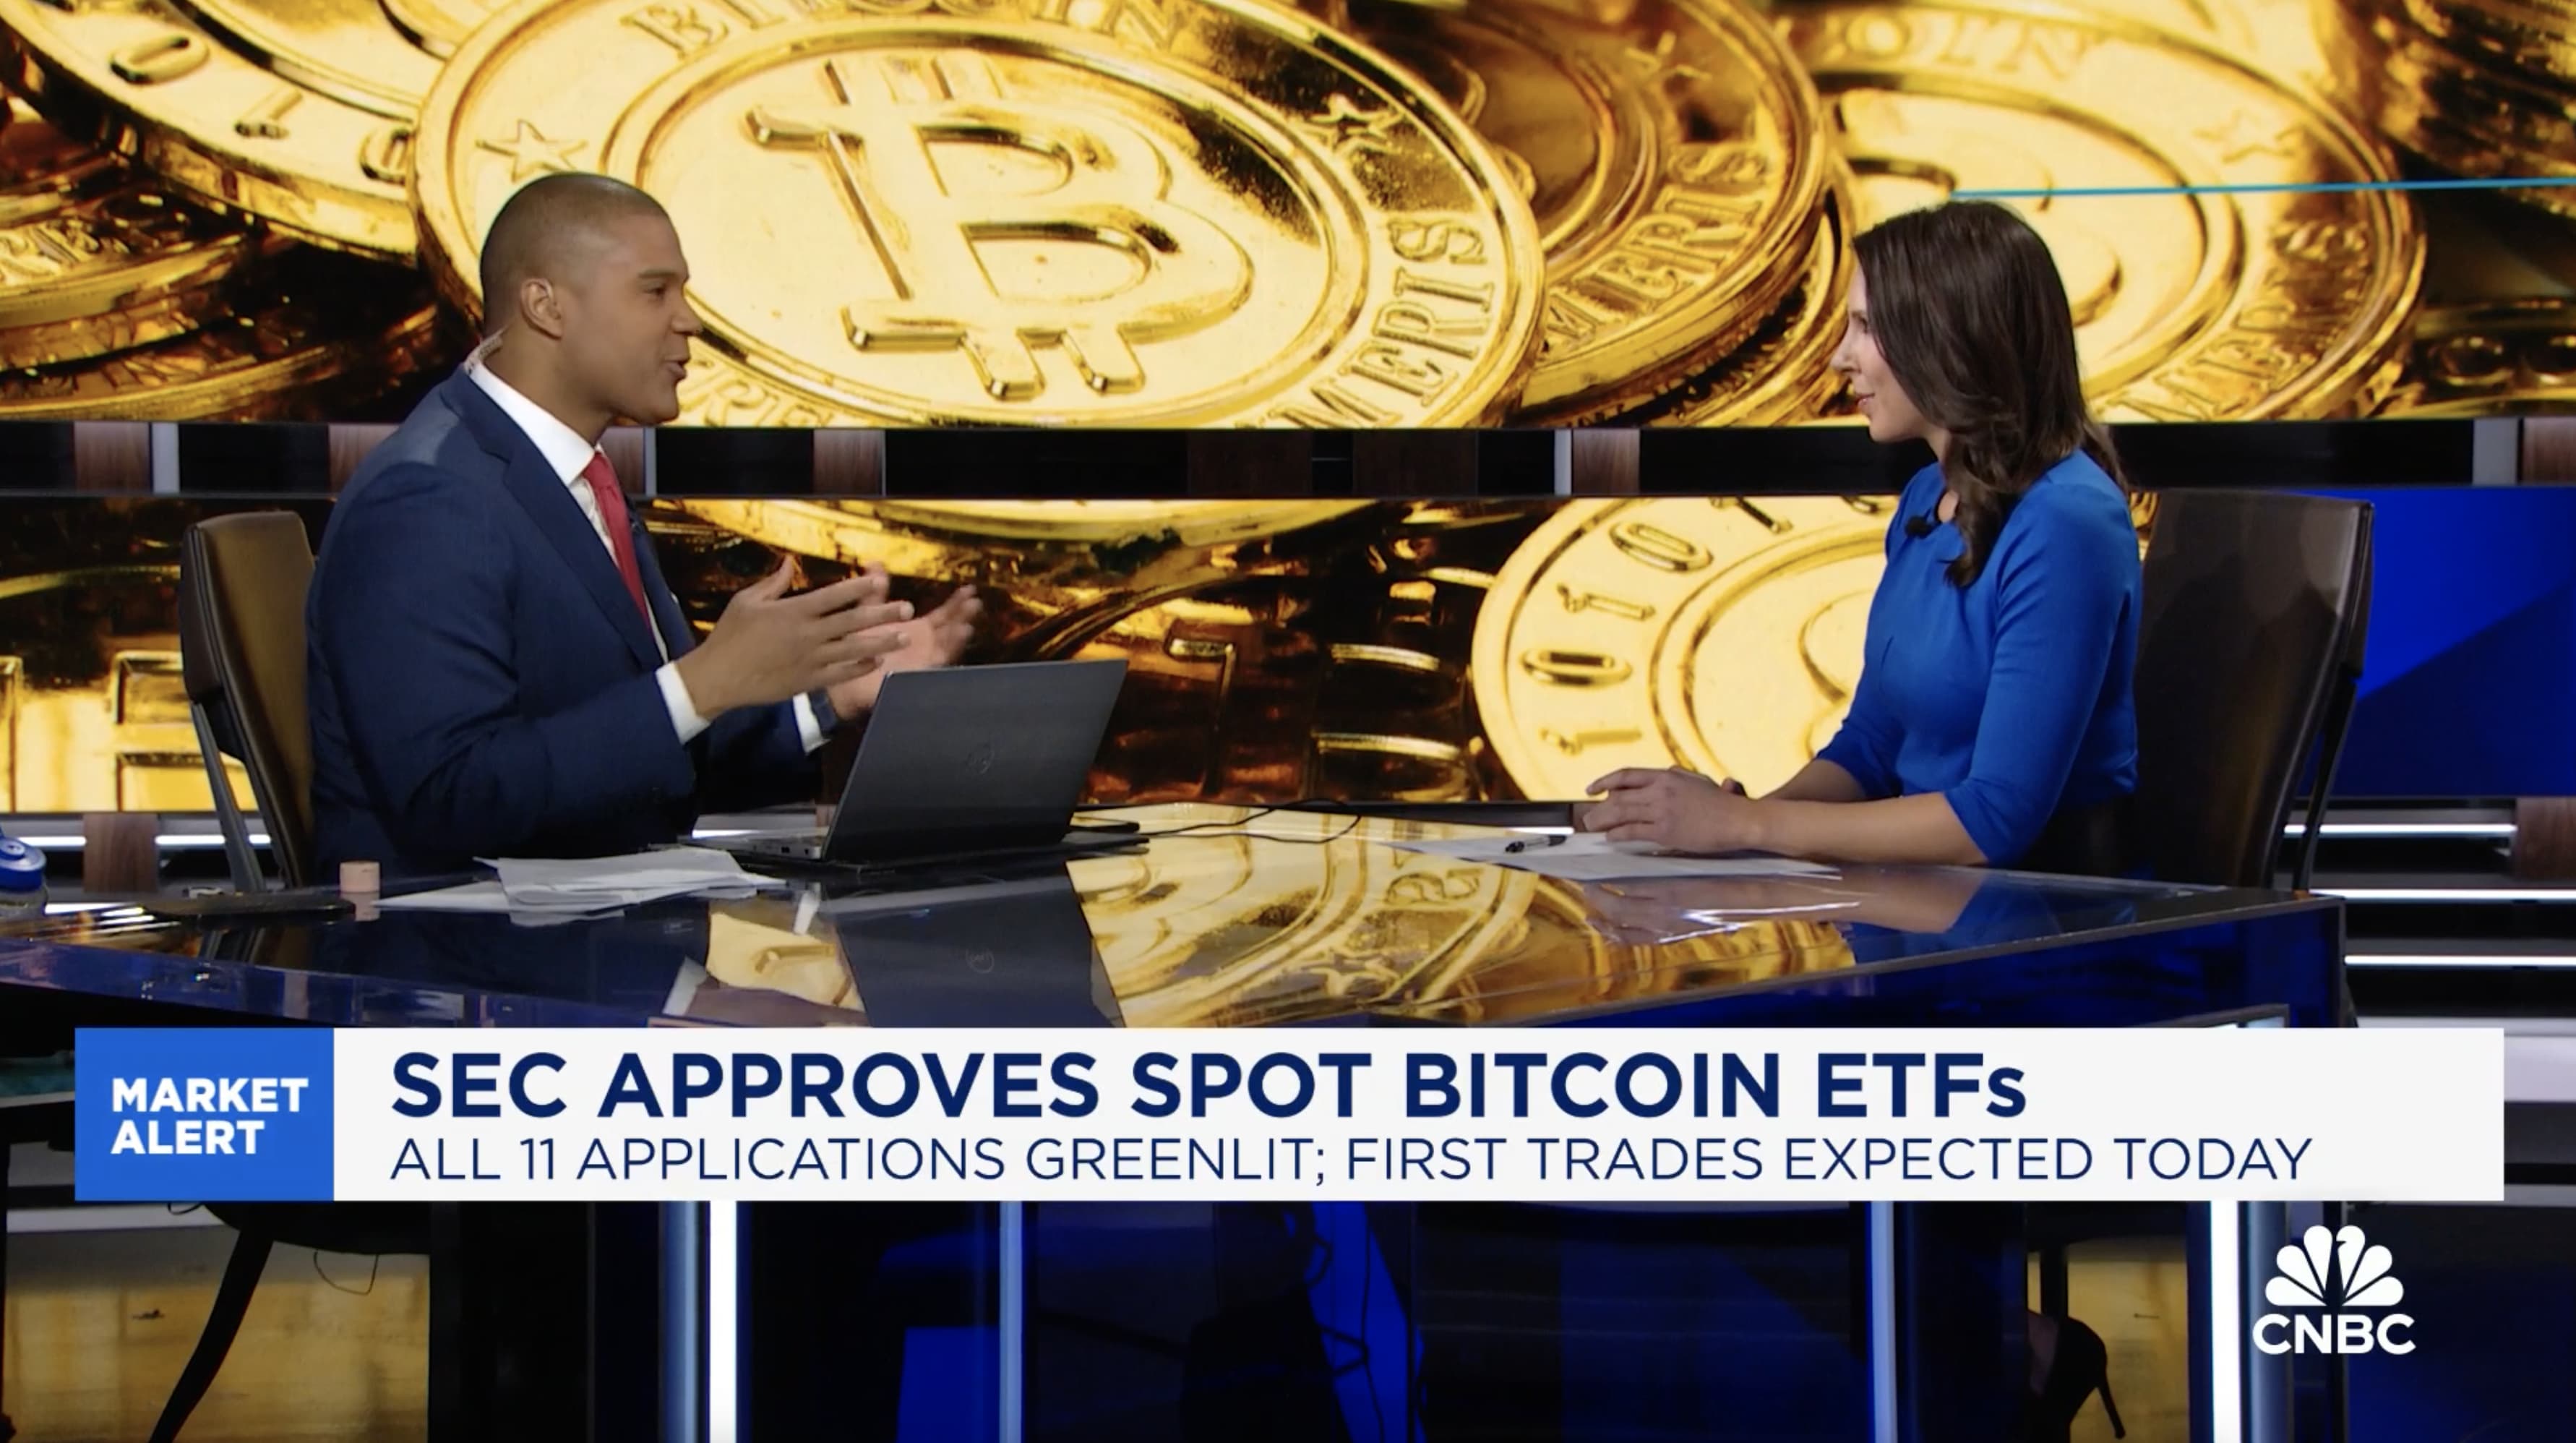 Spot bitcoin ETF decision: First trades expected after SEC grants multiple approvals